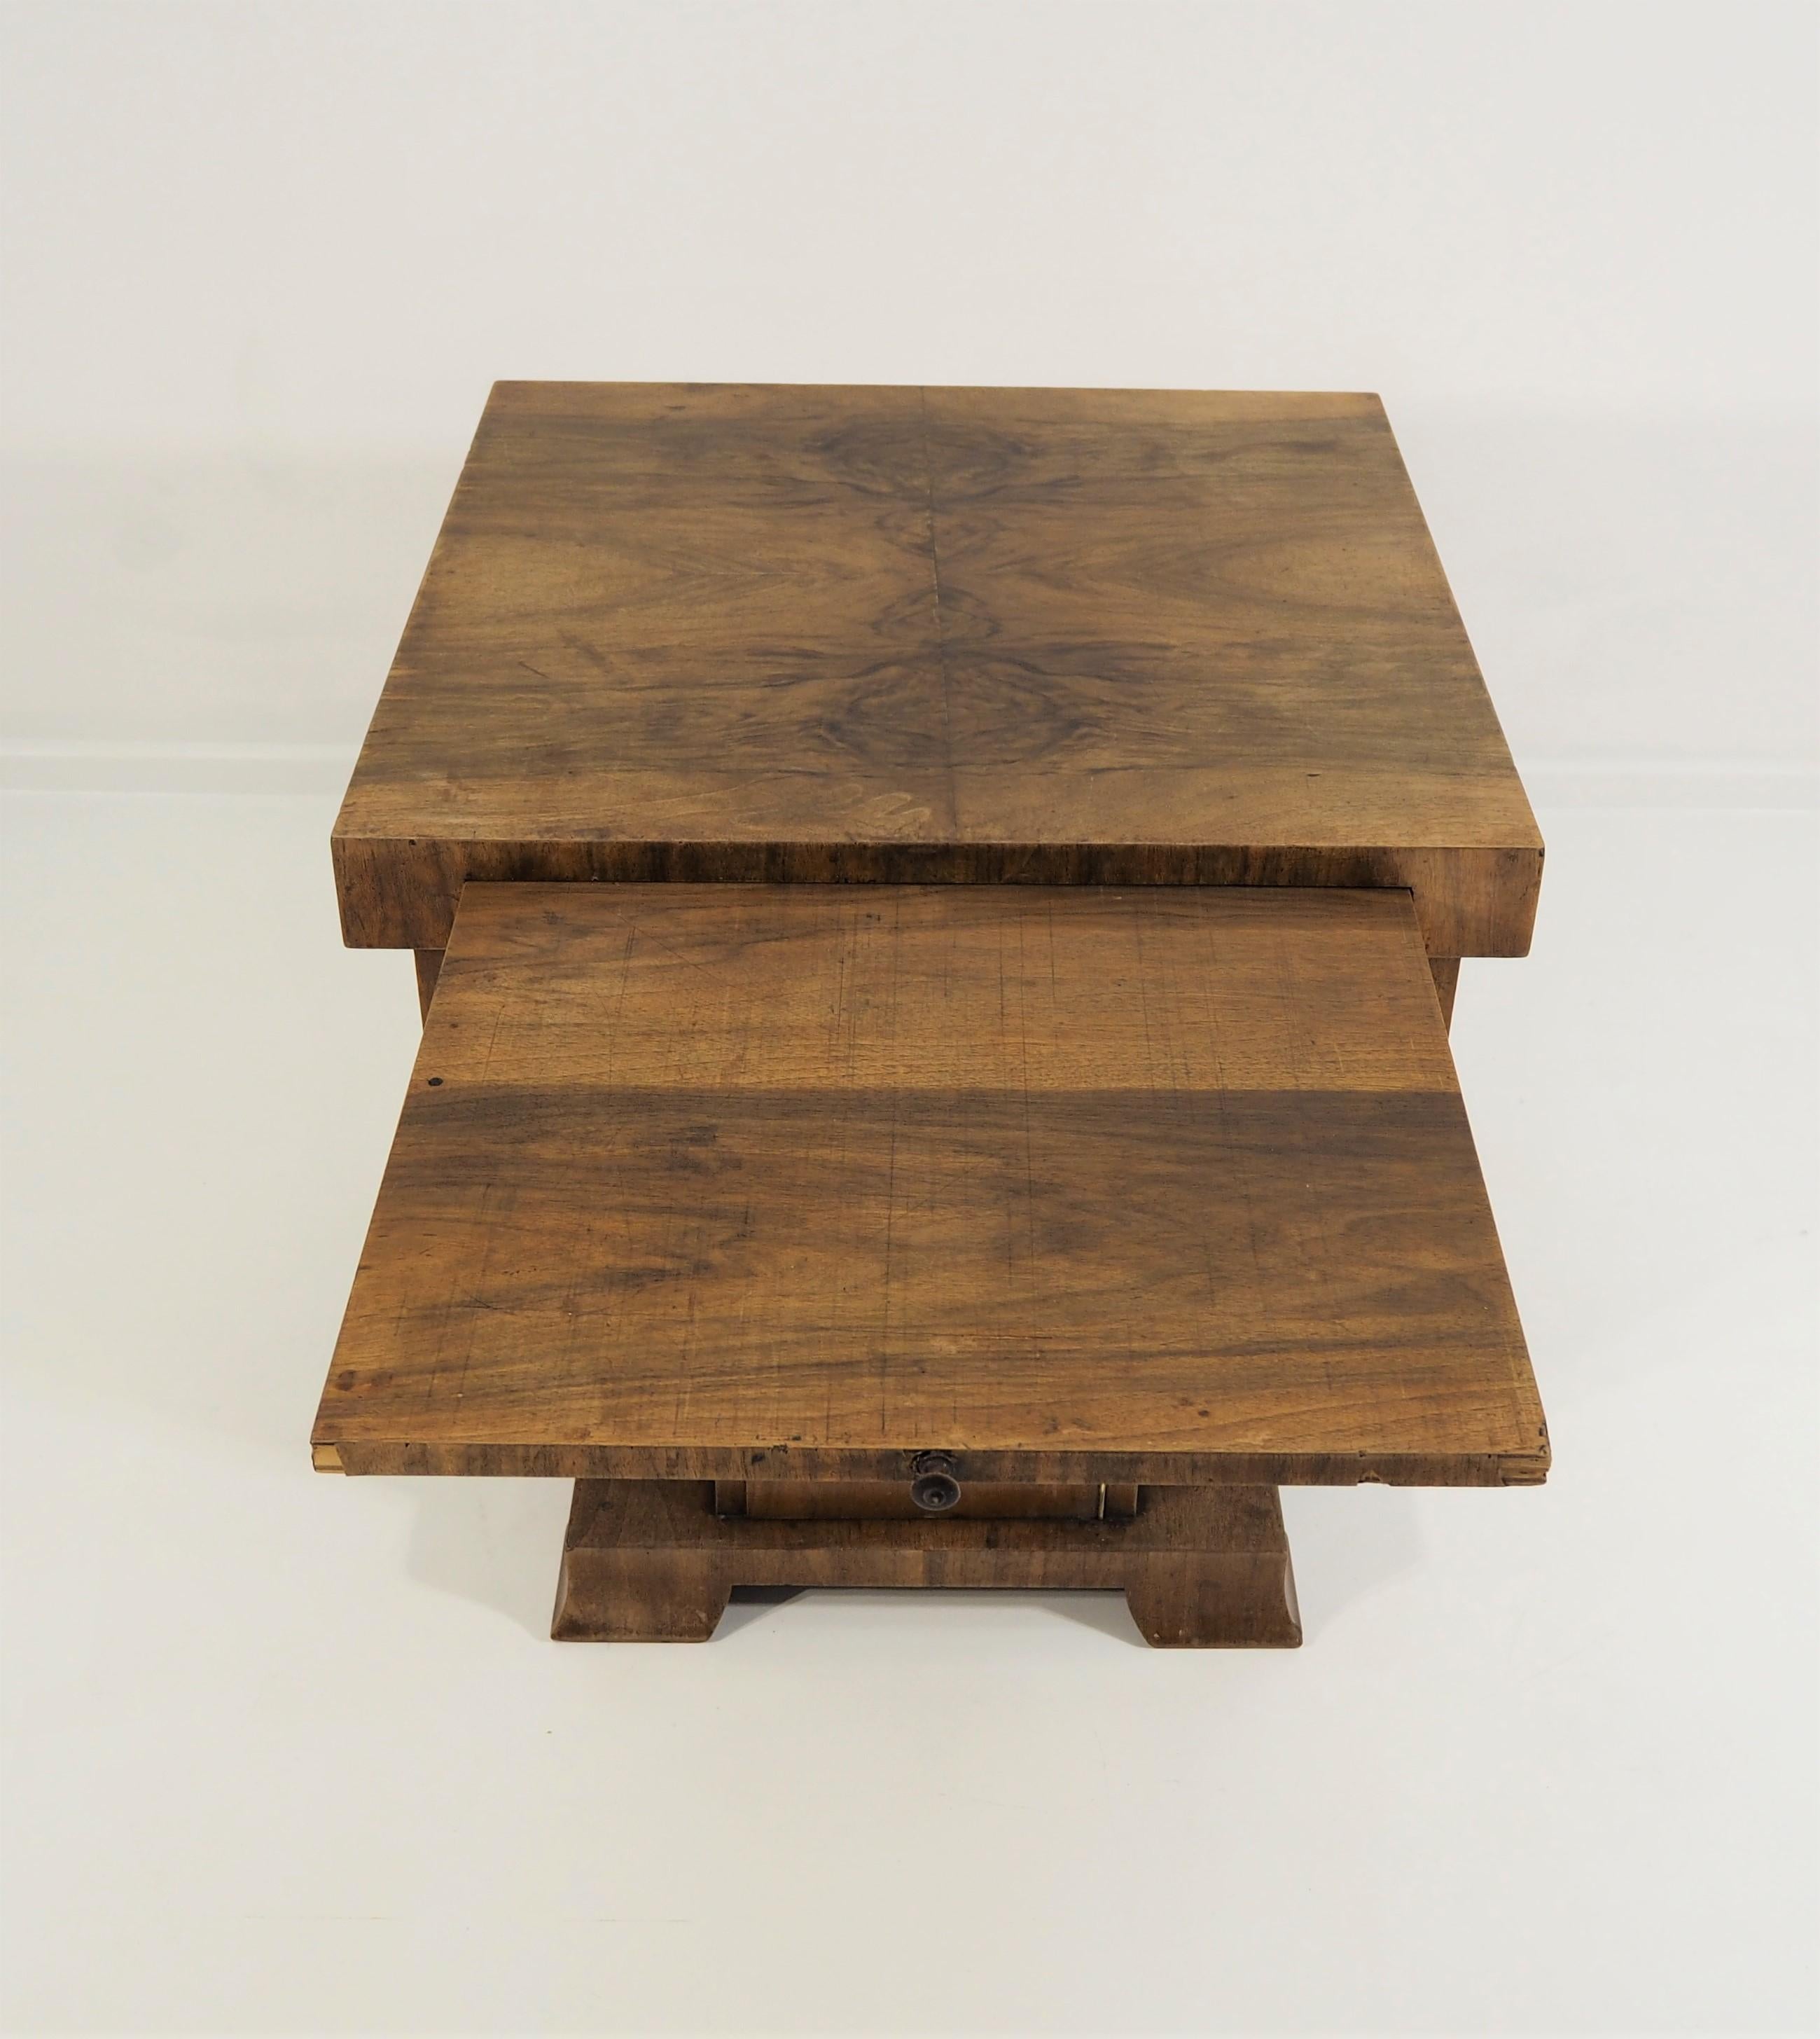 Art Deco walnut table. This table was designed and made in the circa 1940s in the former Czechoslovakia. The material is walnut veneer. Dimensions: Height 64cm, length 65cm, width 65cm. Original condition and fully functional.